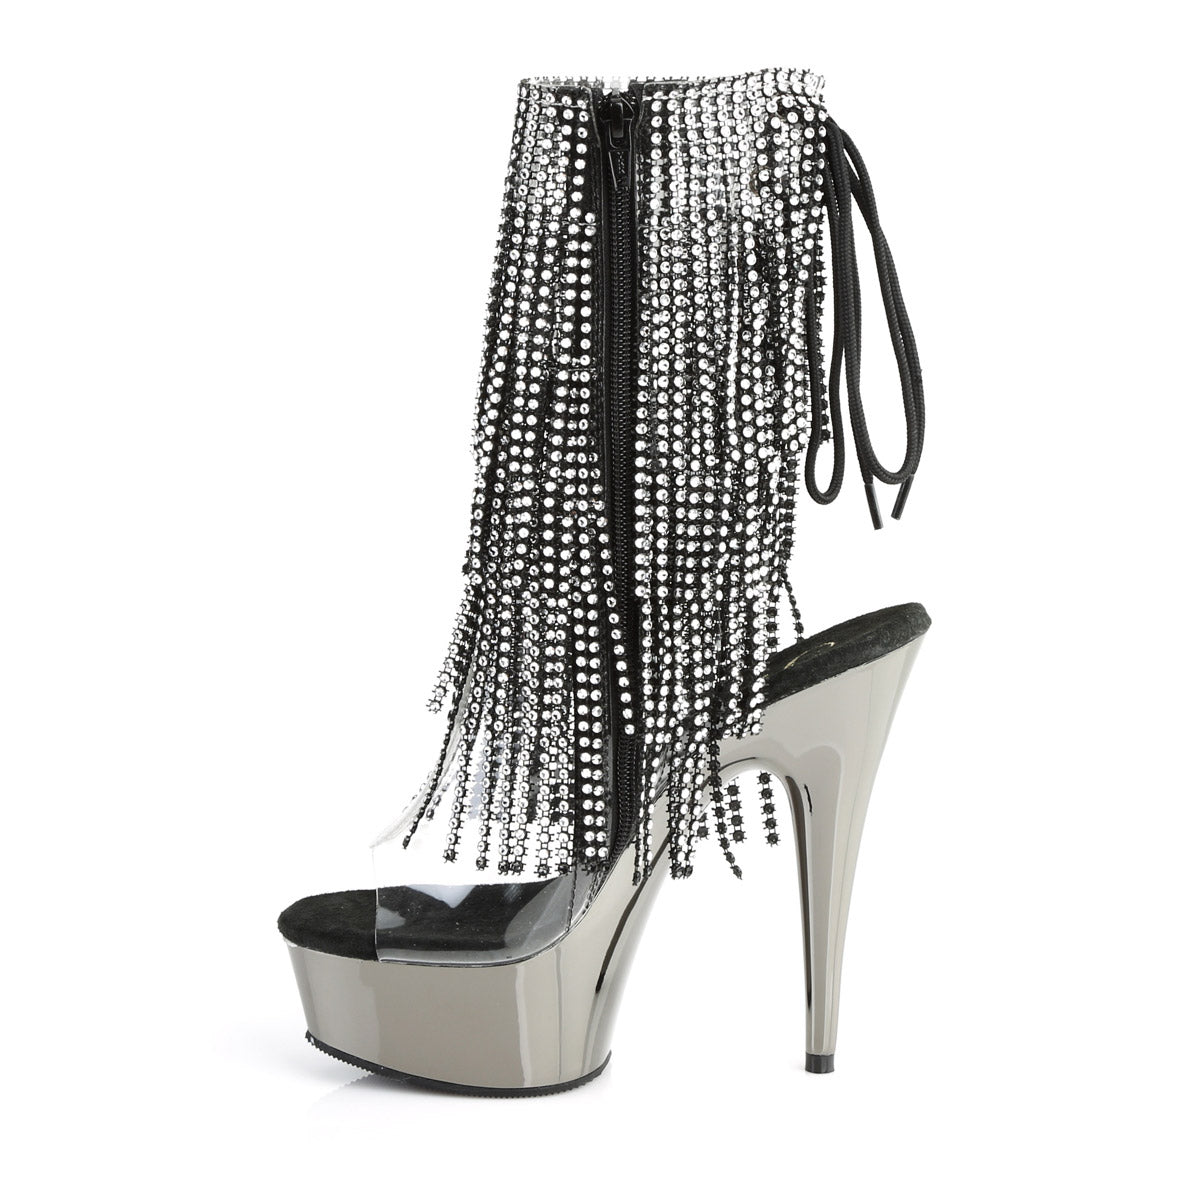 6" Heel, 1 3/4" PF Open Toe/Heel Lace-Up Fringe Ankle Boot Clr-Blk/Dark Pewter Chrome Pleaser Pleaser DELIGHT/1017RSF